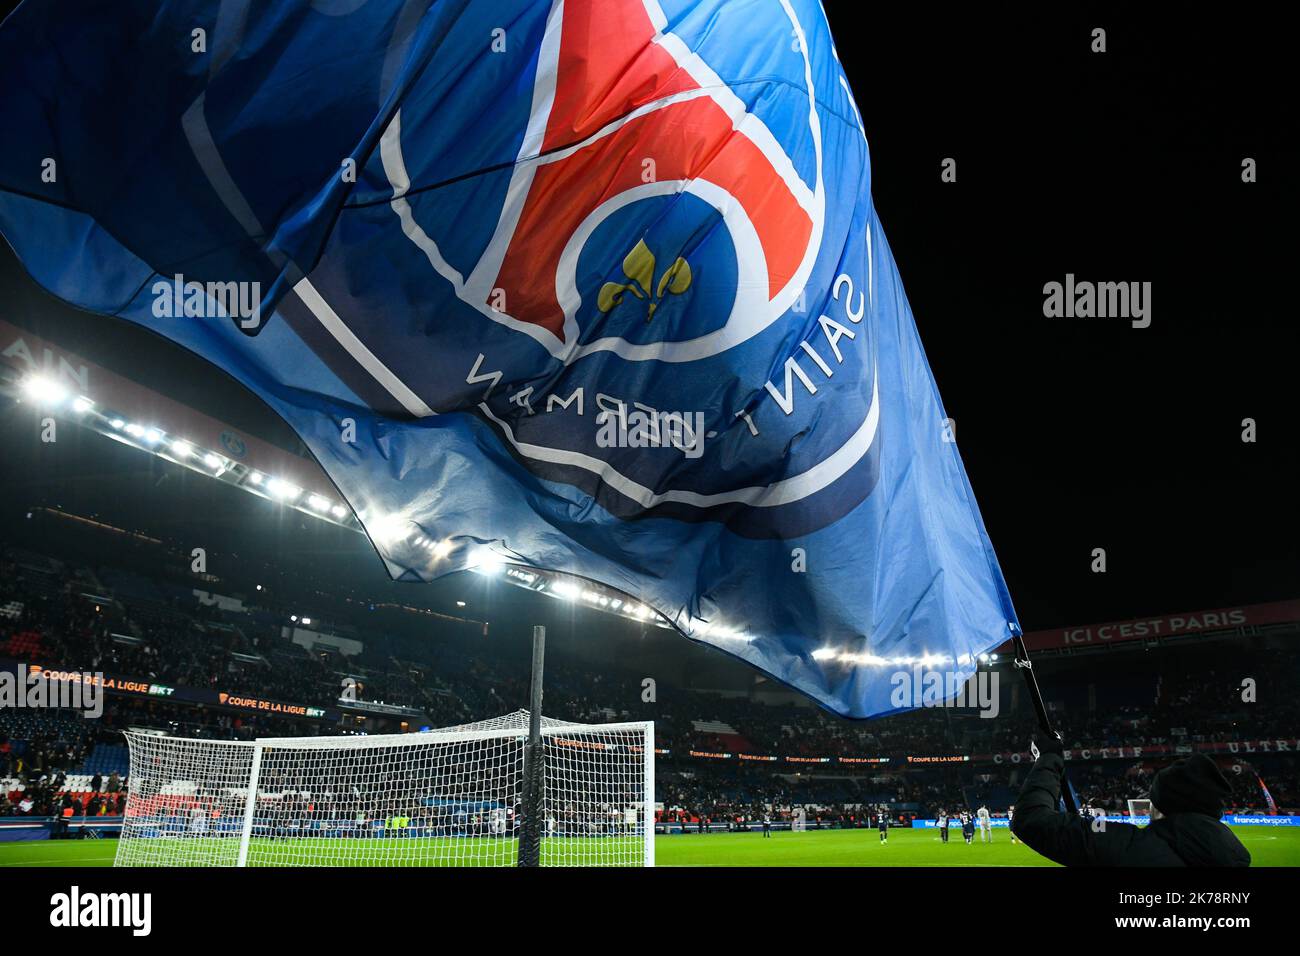 The PSG flag during the 1/4 League Cup Final at the Parc des